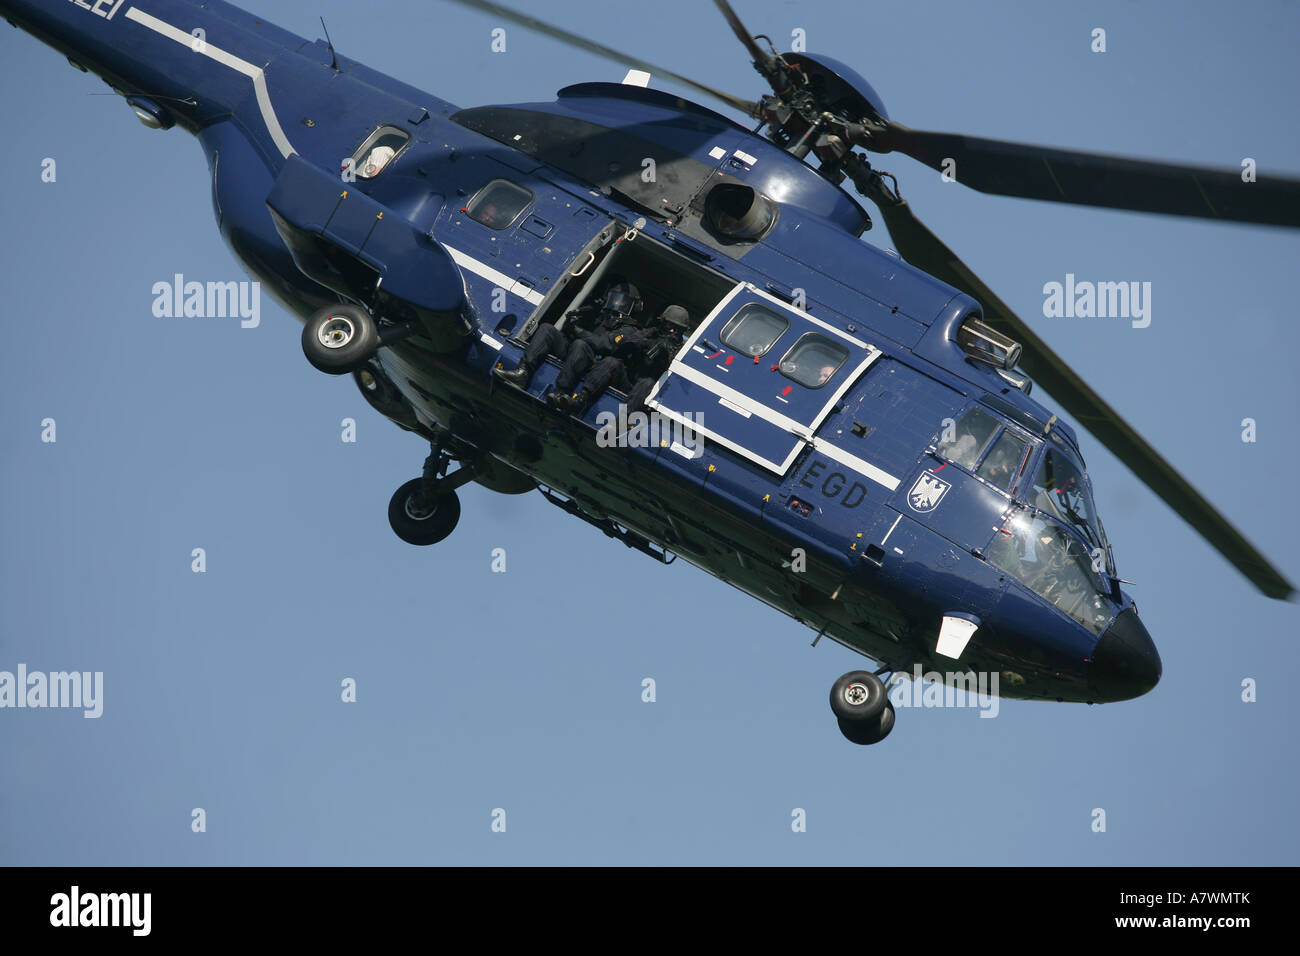 German police helicopter AS 332 L1 Super Puma Stock Photo